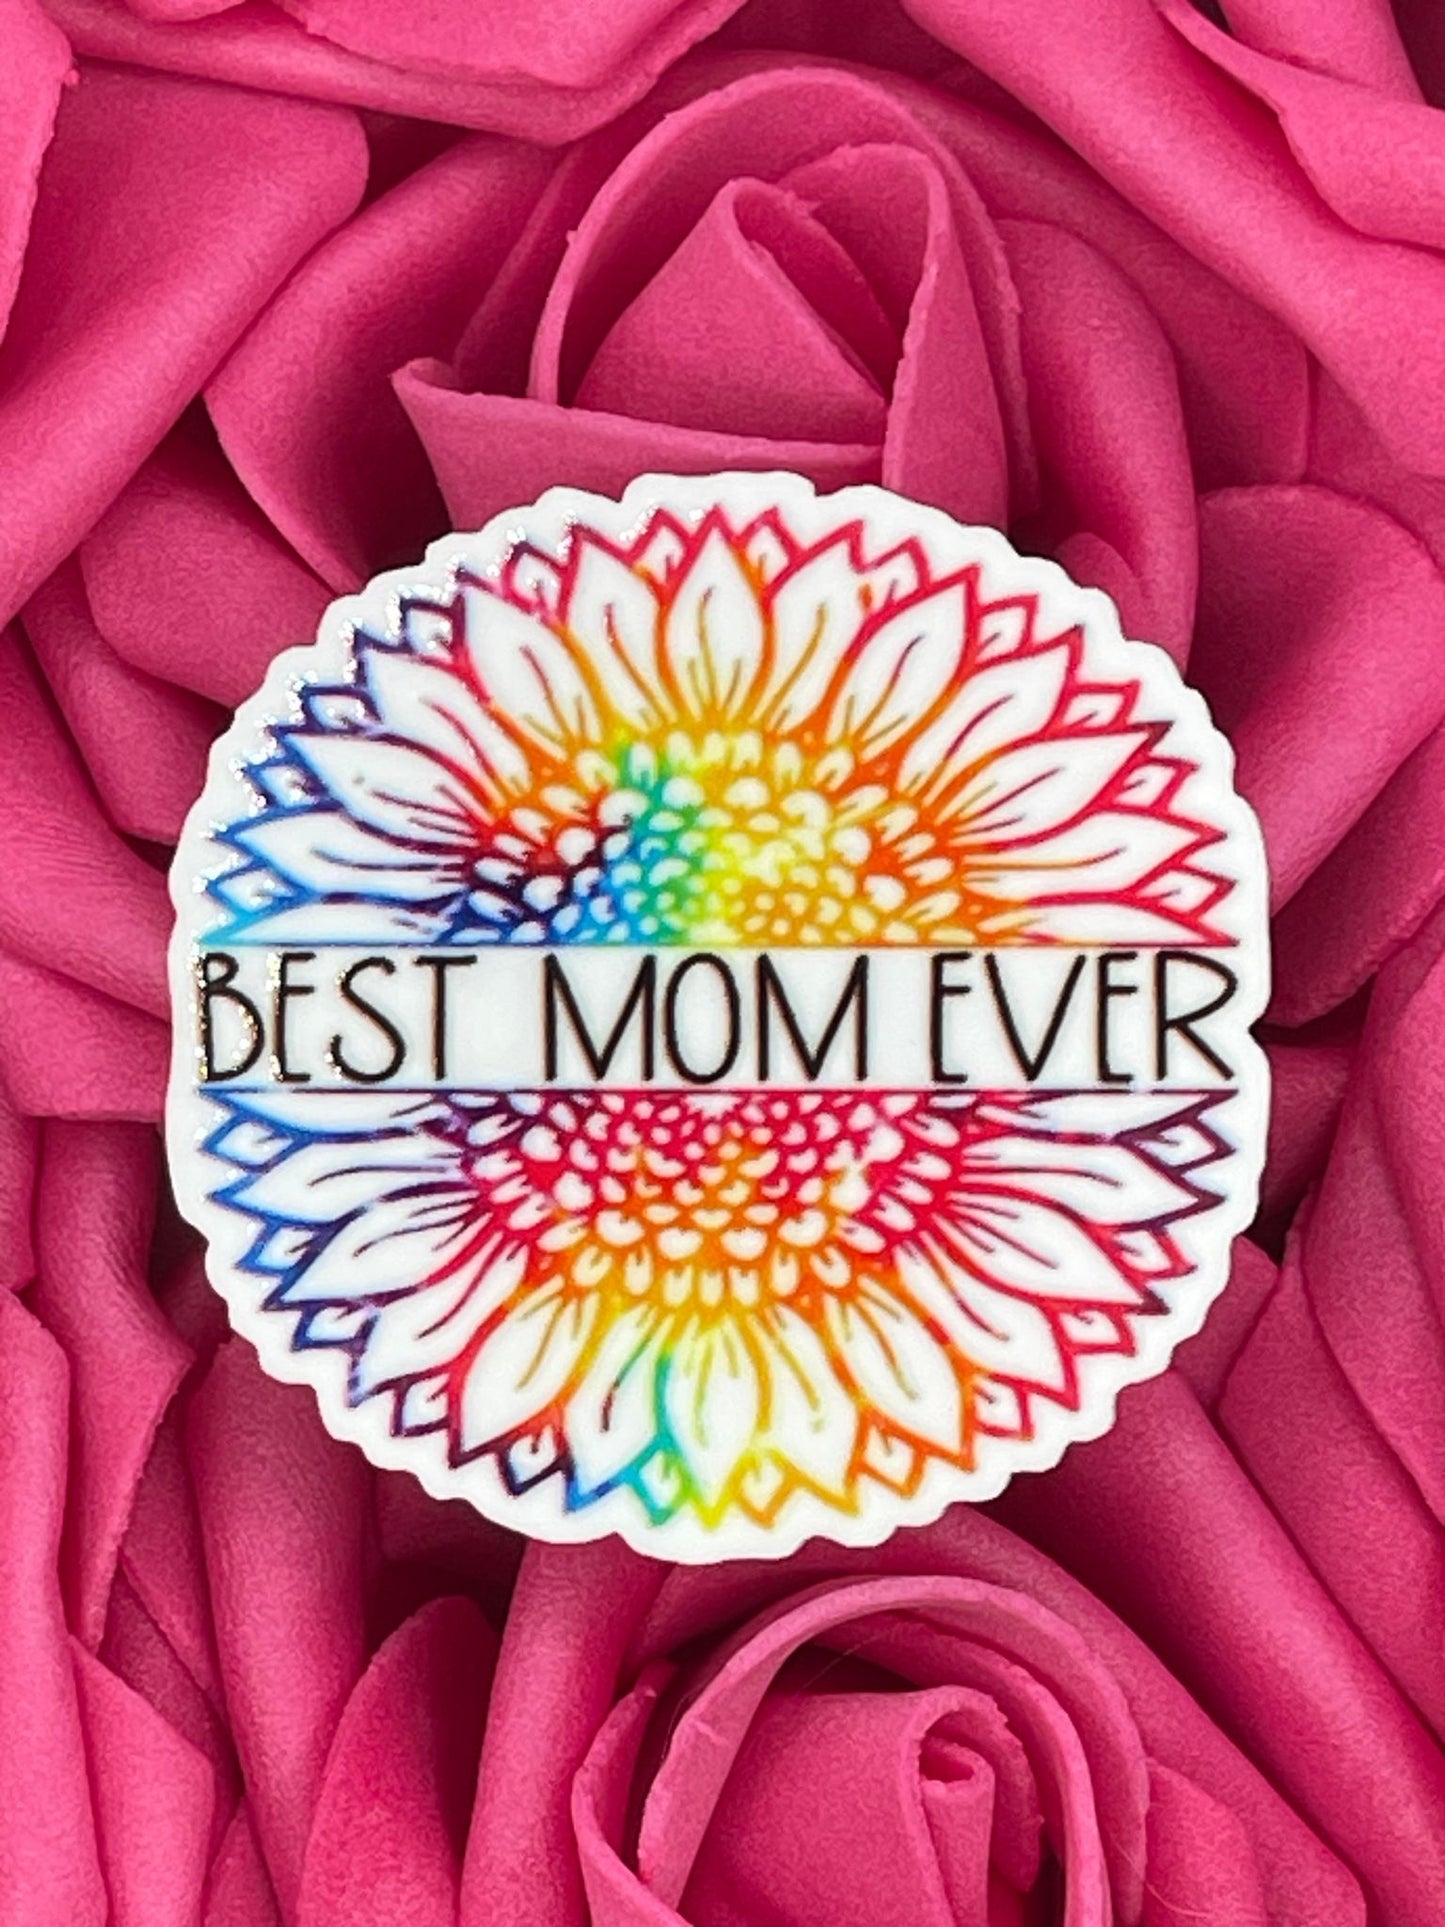 #124 Best mom ever